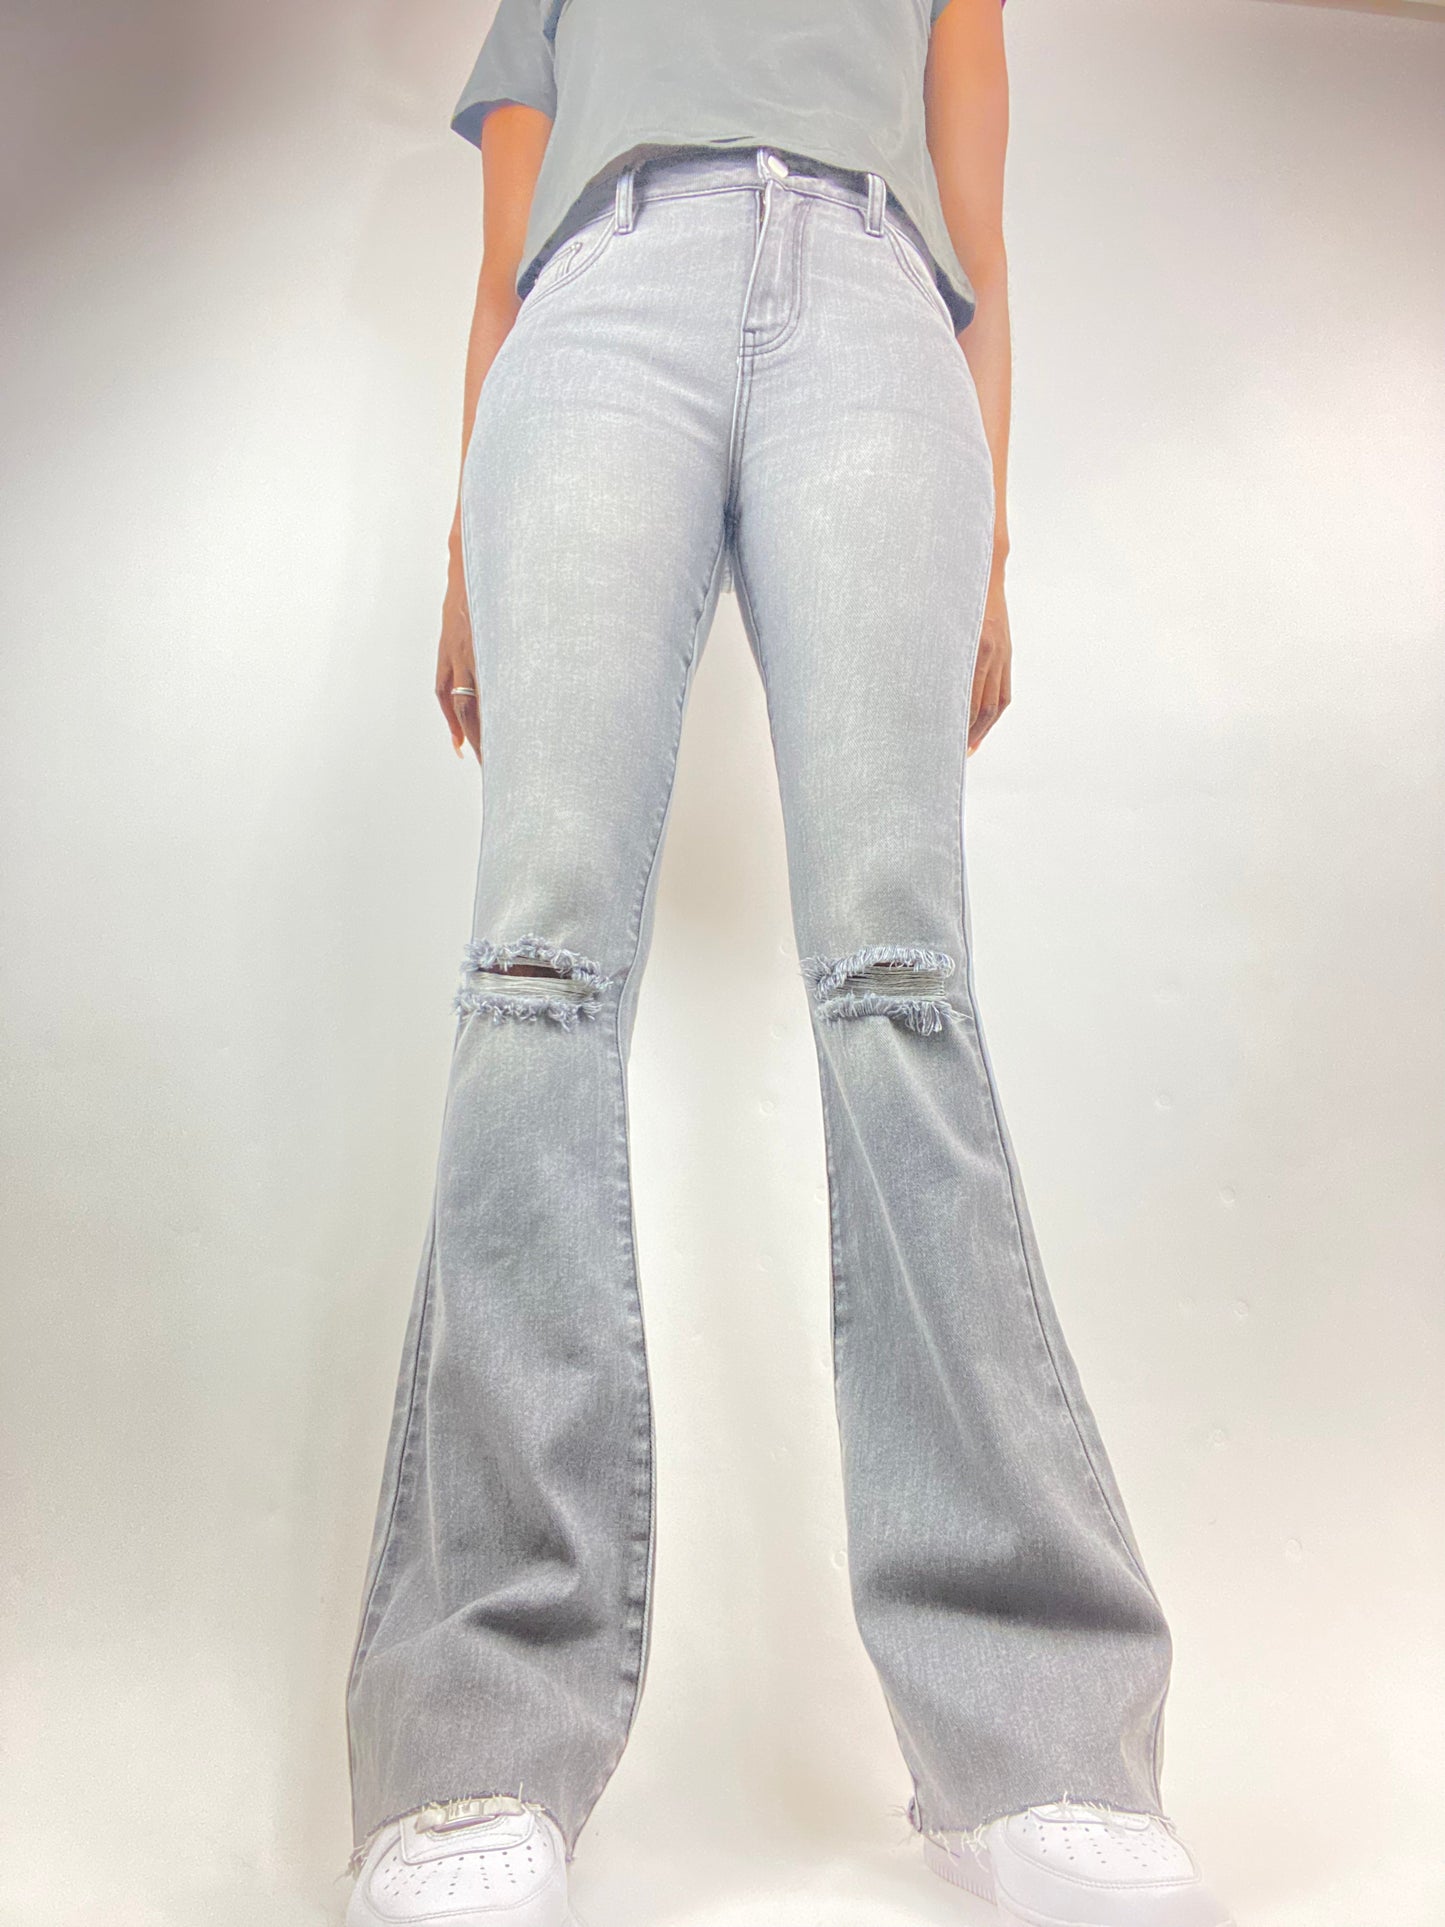 tall girl flared jeans in gray wash with  distressed knee